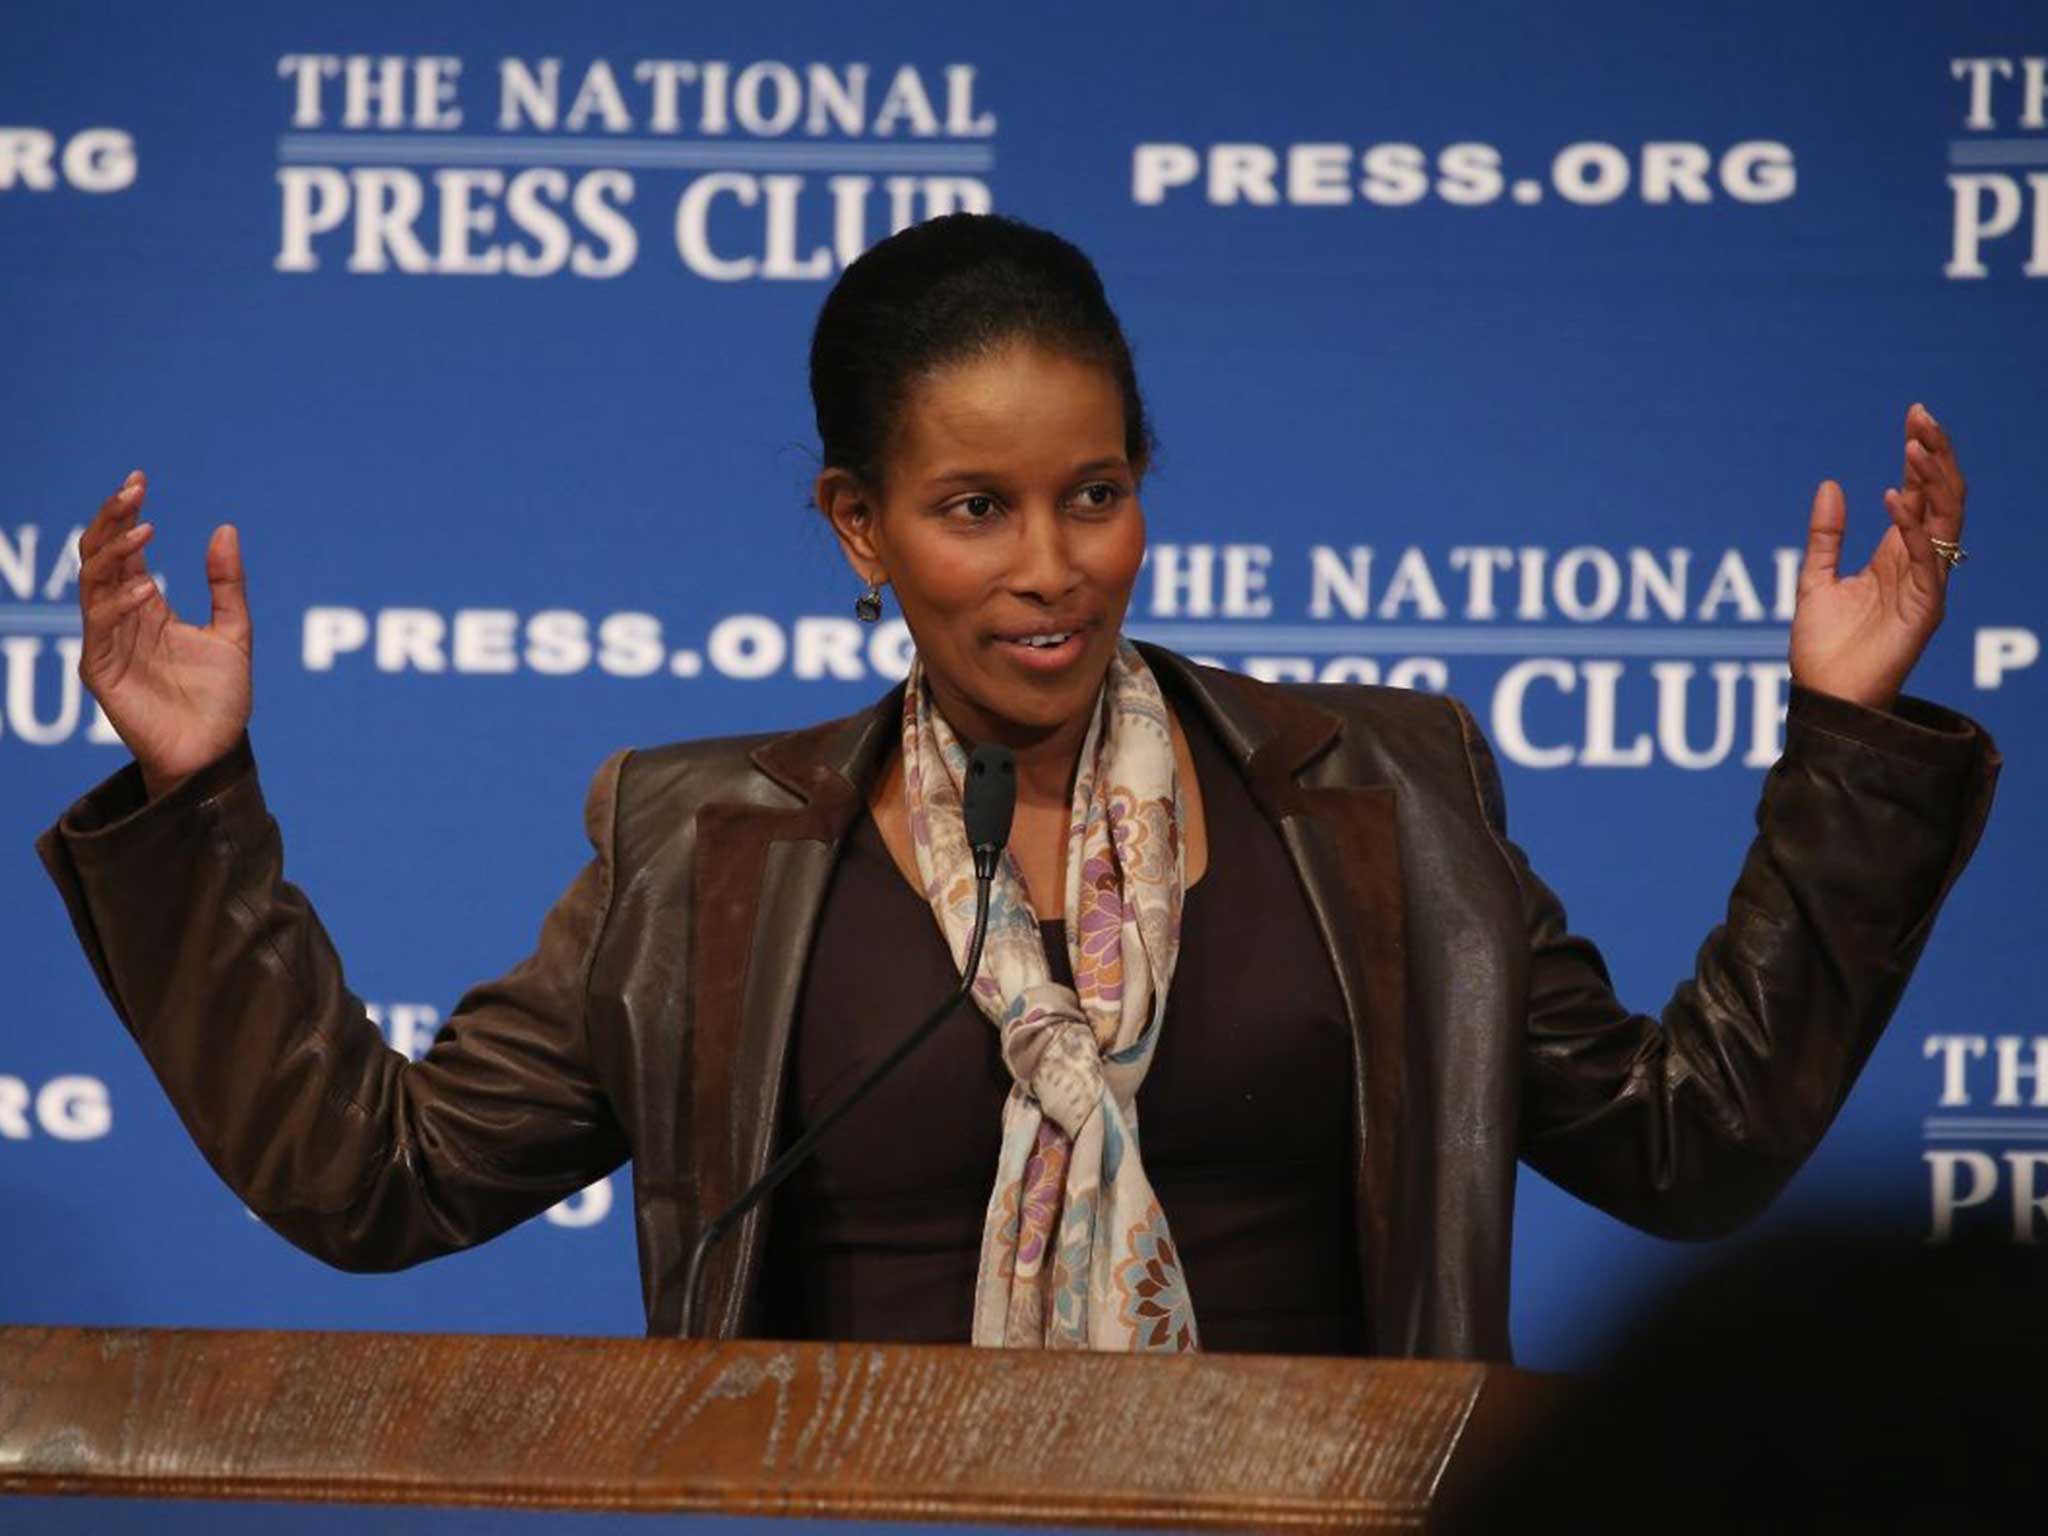 Activist and author Ayaan Hirsi Ali speaks at the National Press Club